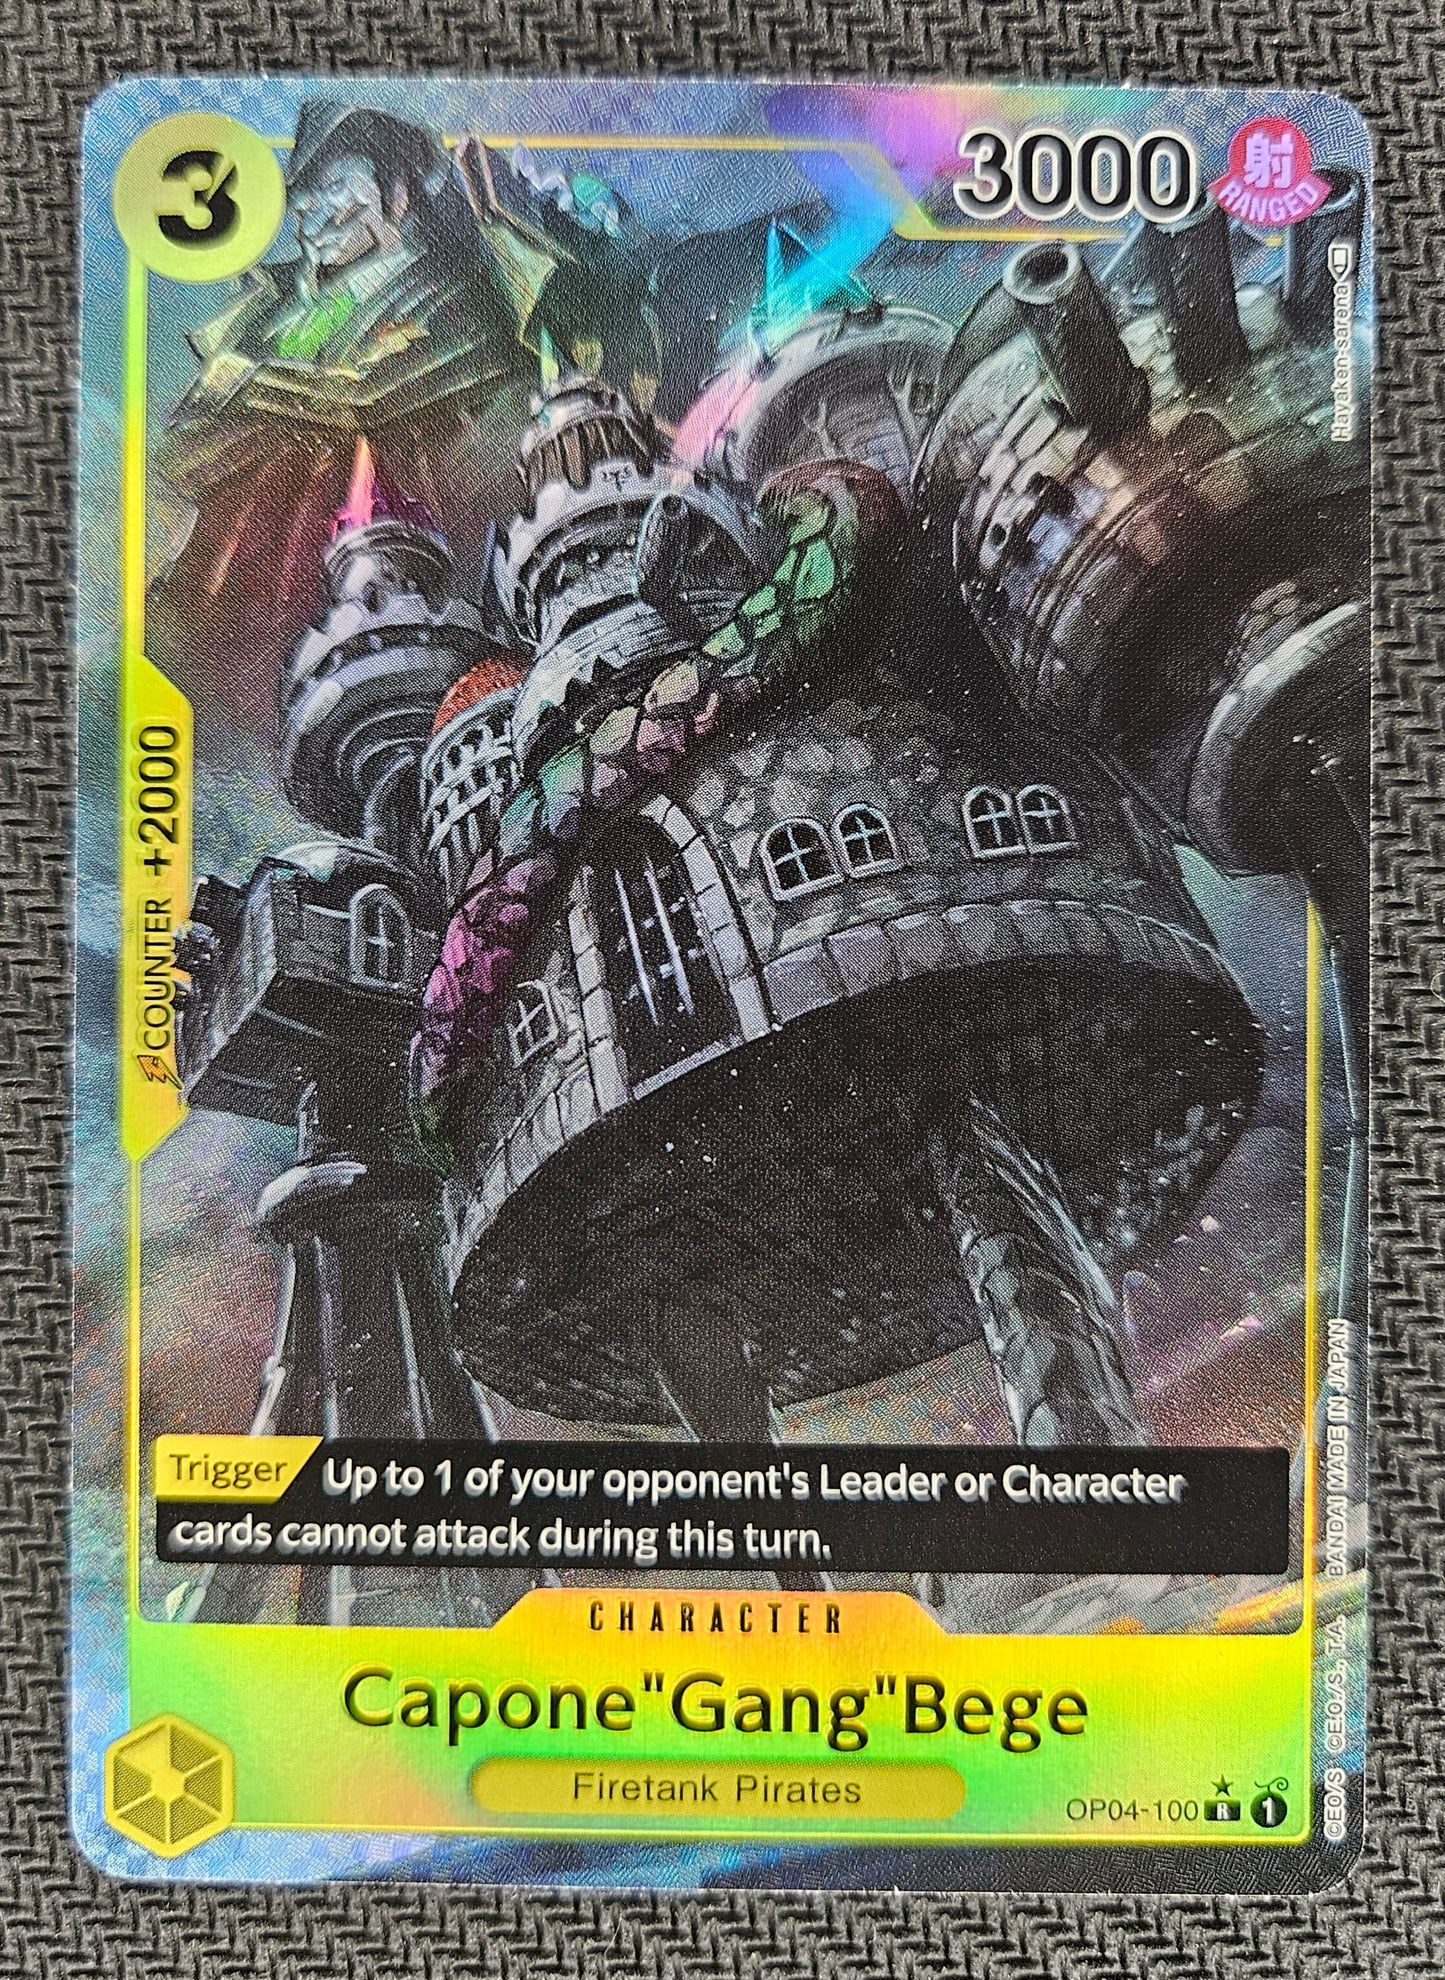 One Piece TCG Kingdoms of Intrigue OP04-100 Capone "Gang" Bege Alternative Art